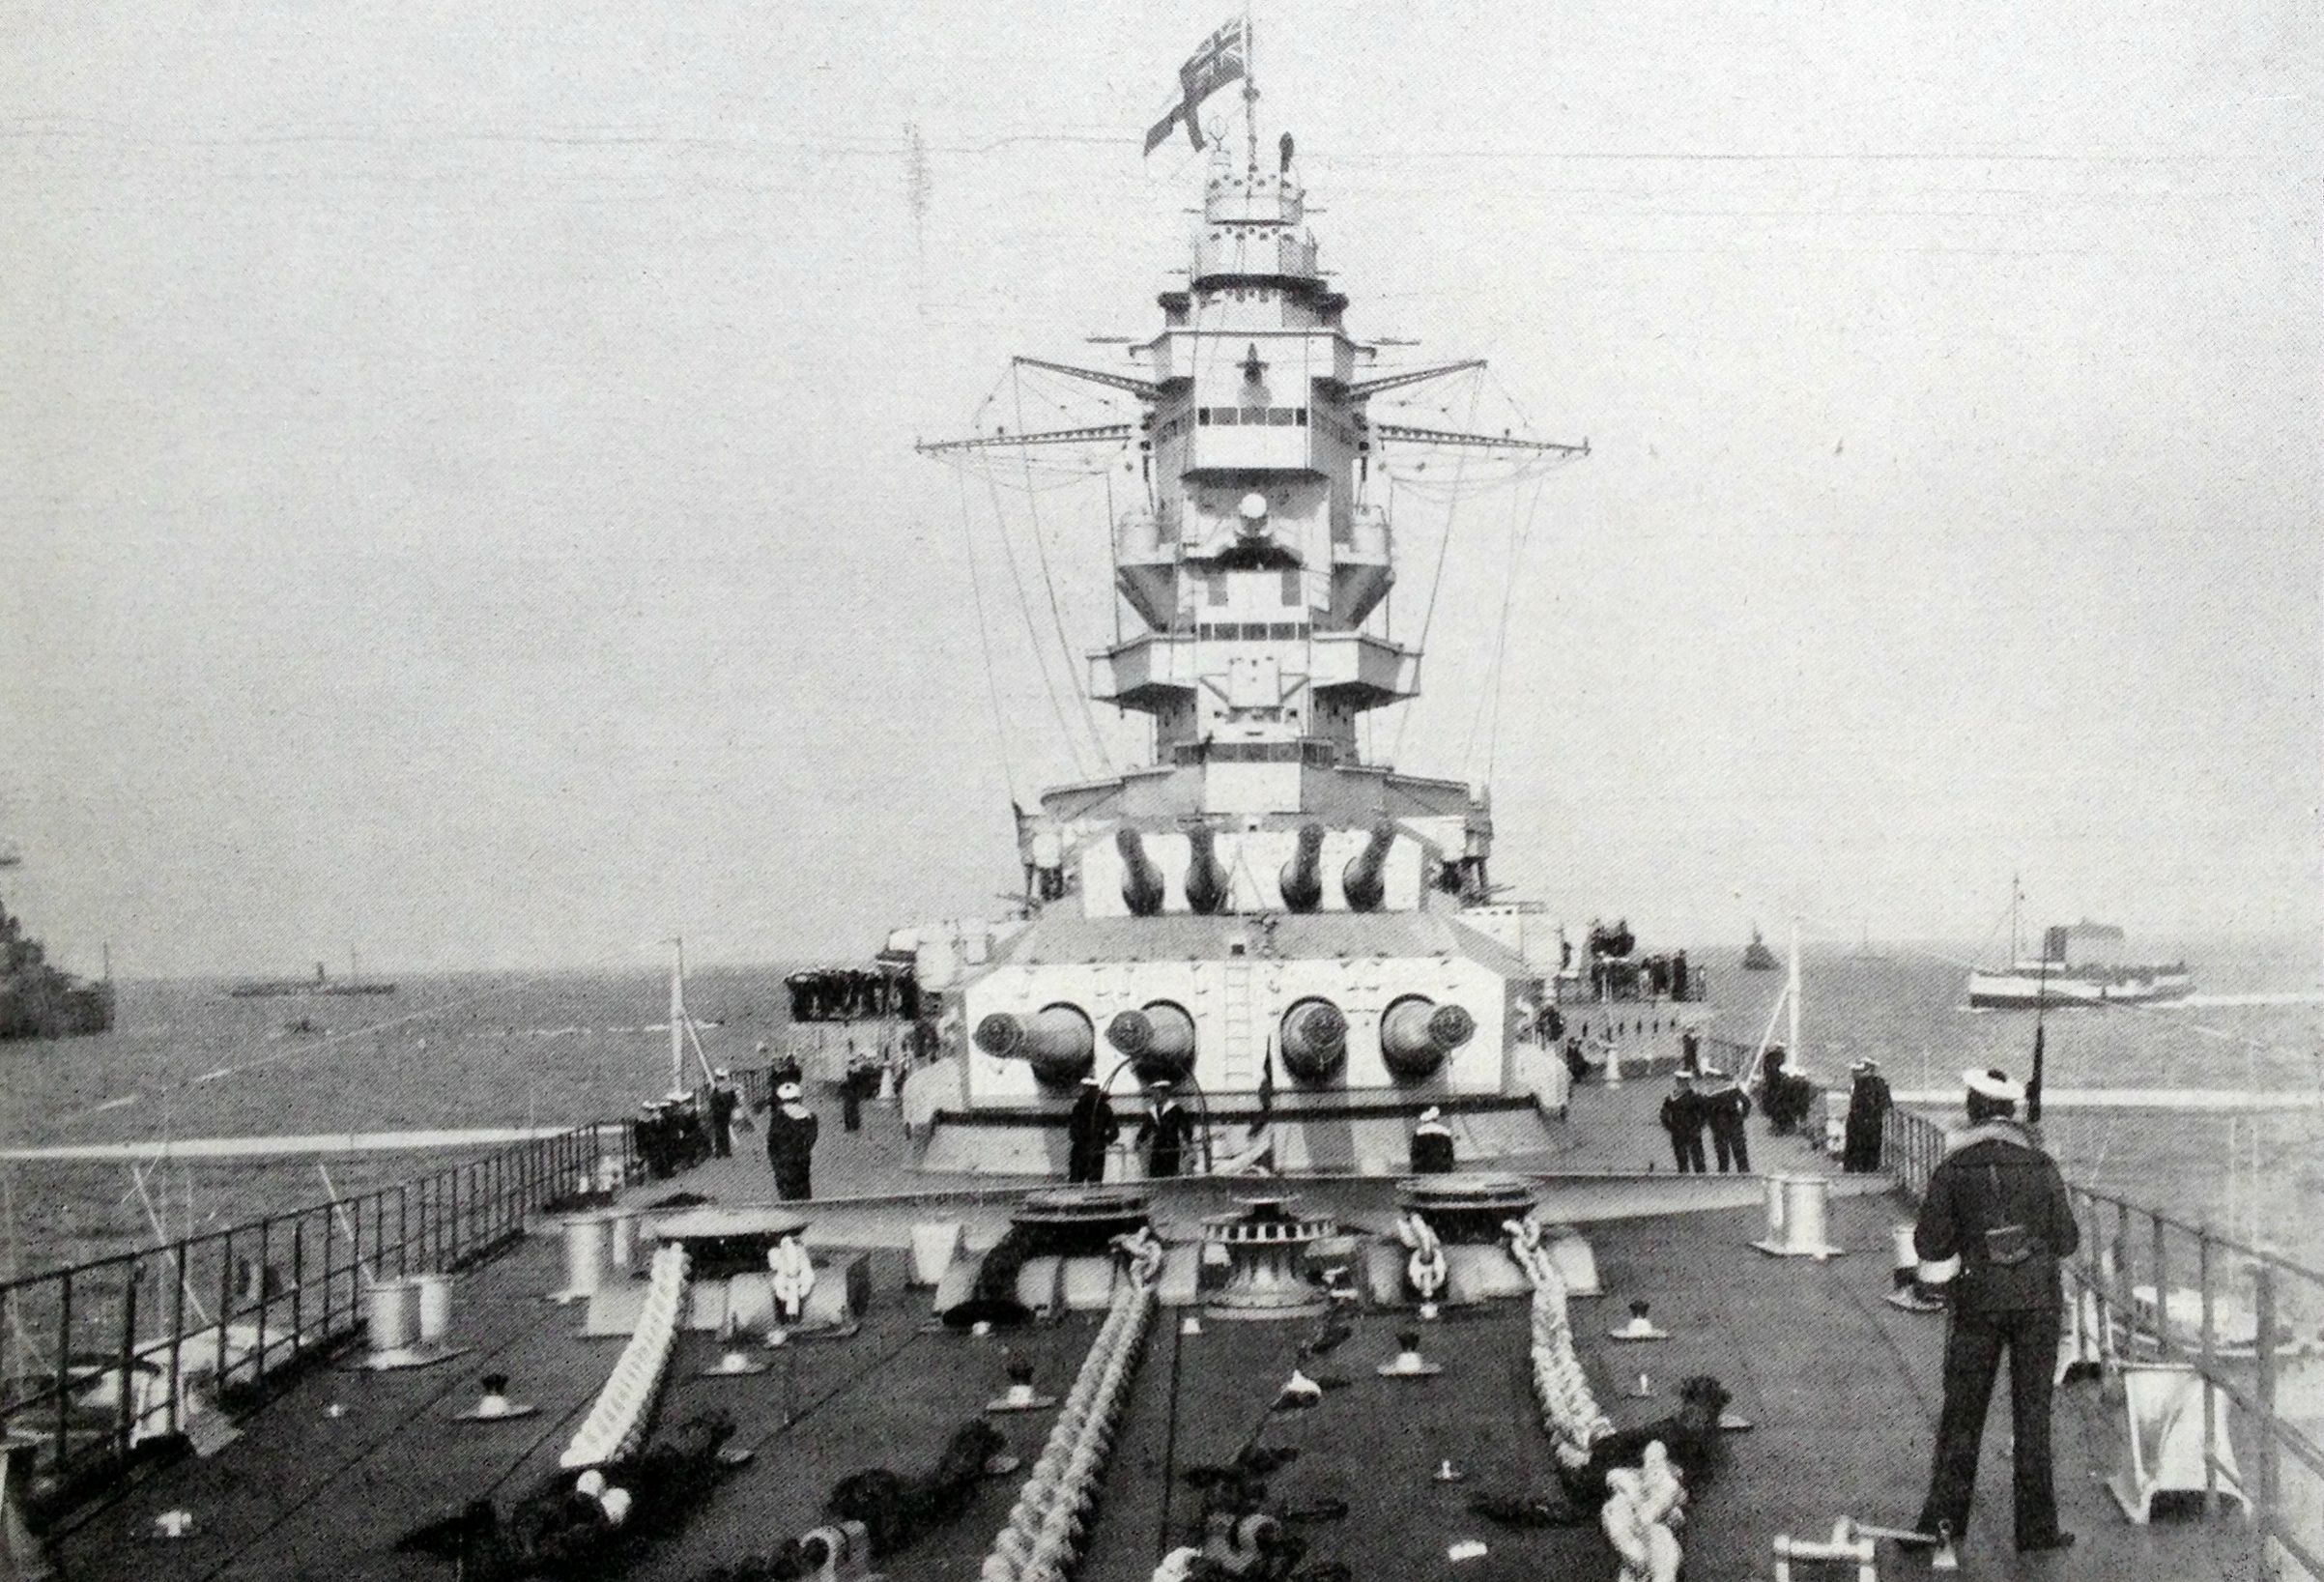 French Battleship Dunkerque Pics, Military Collection